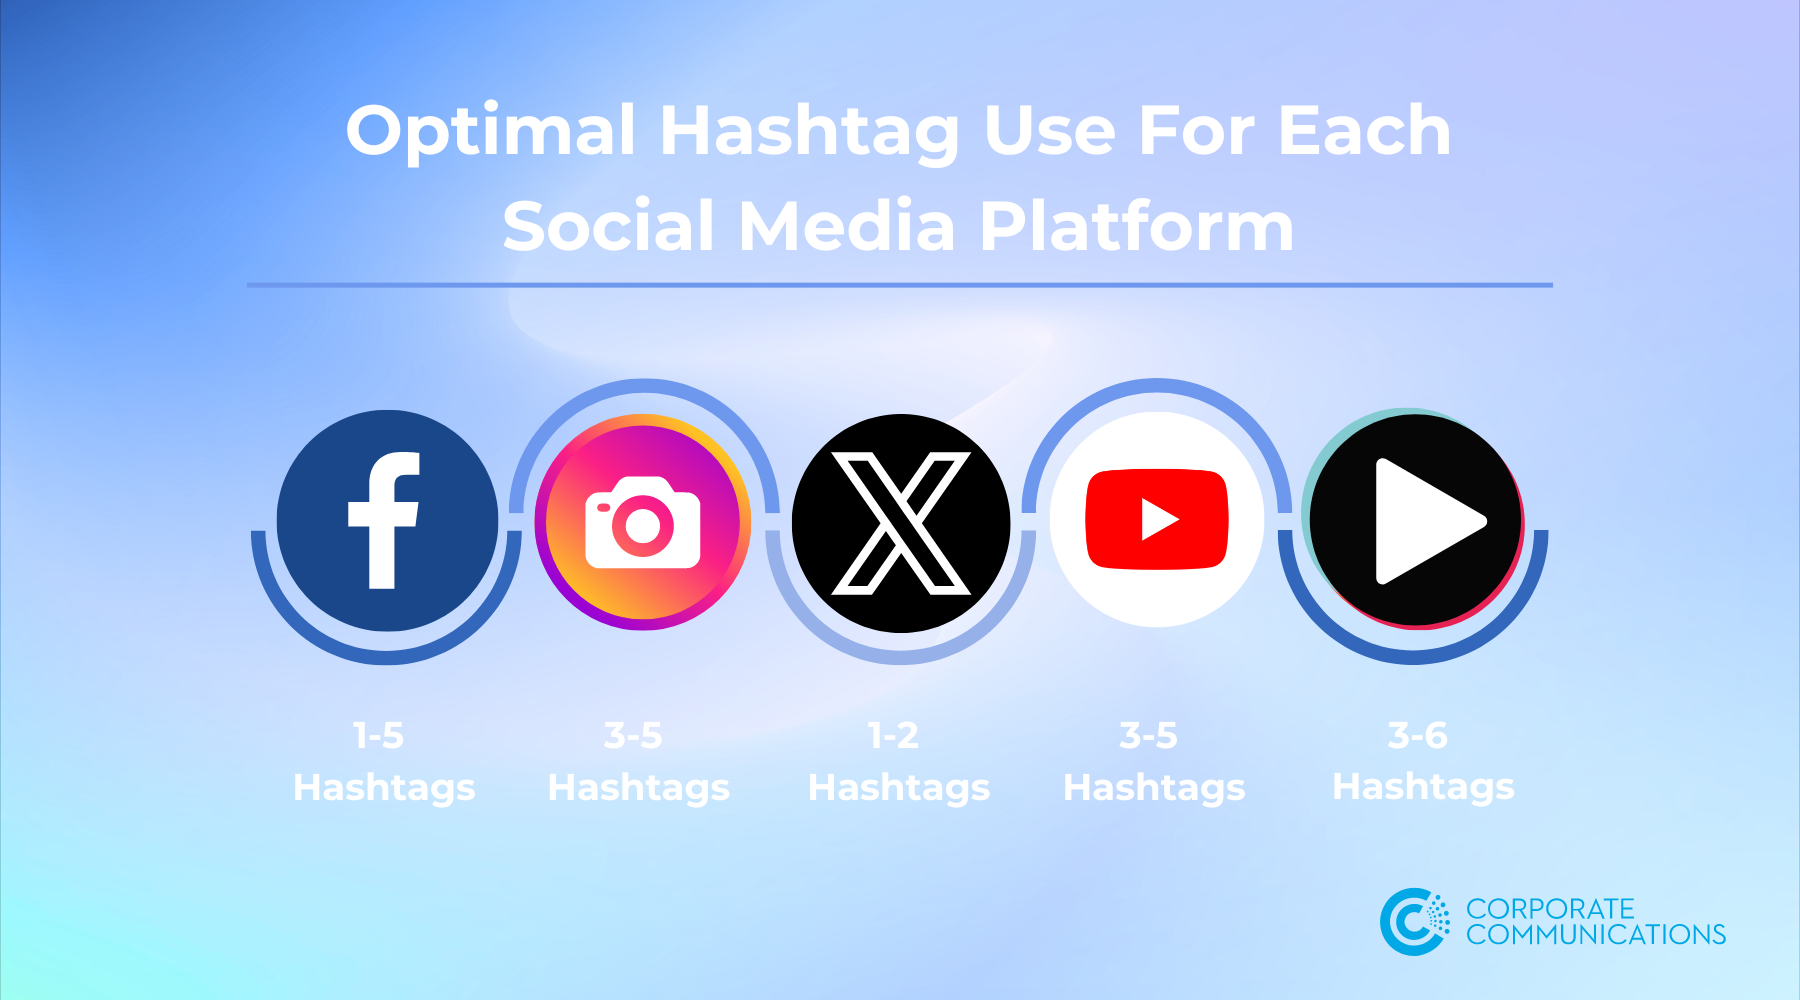 Graphic showing how many hashtags you should use for each social media platform